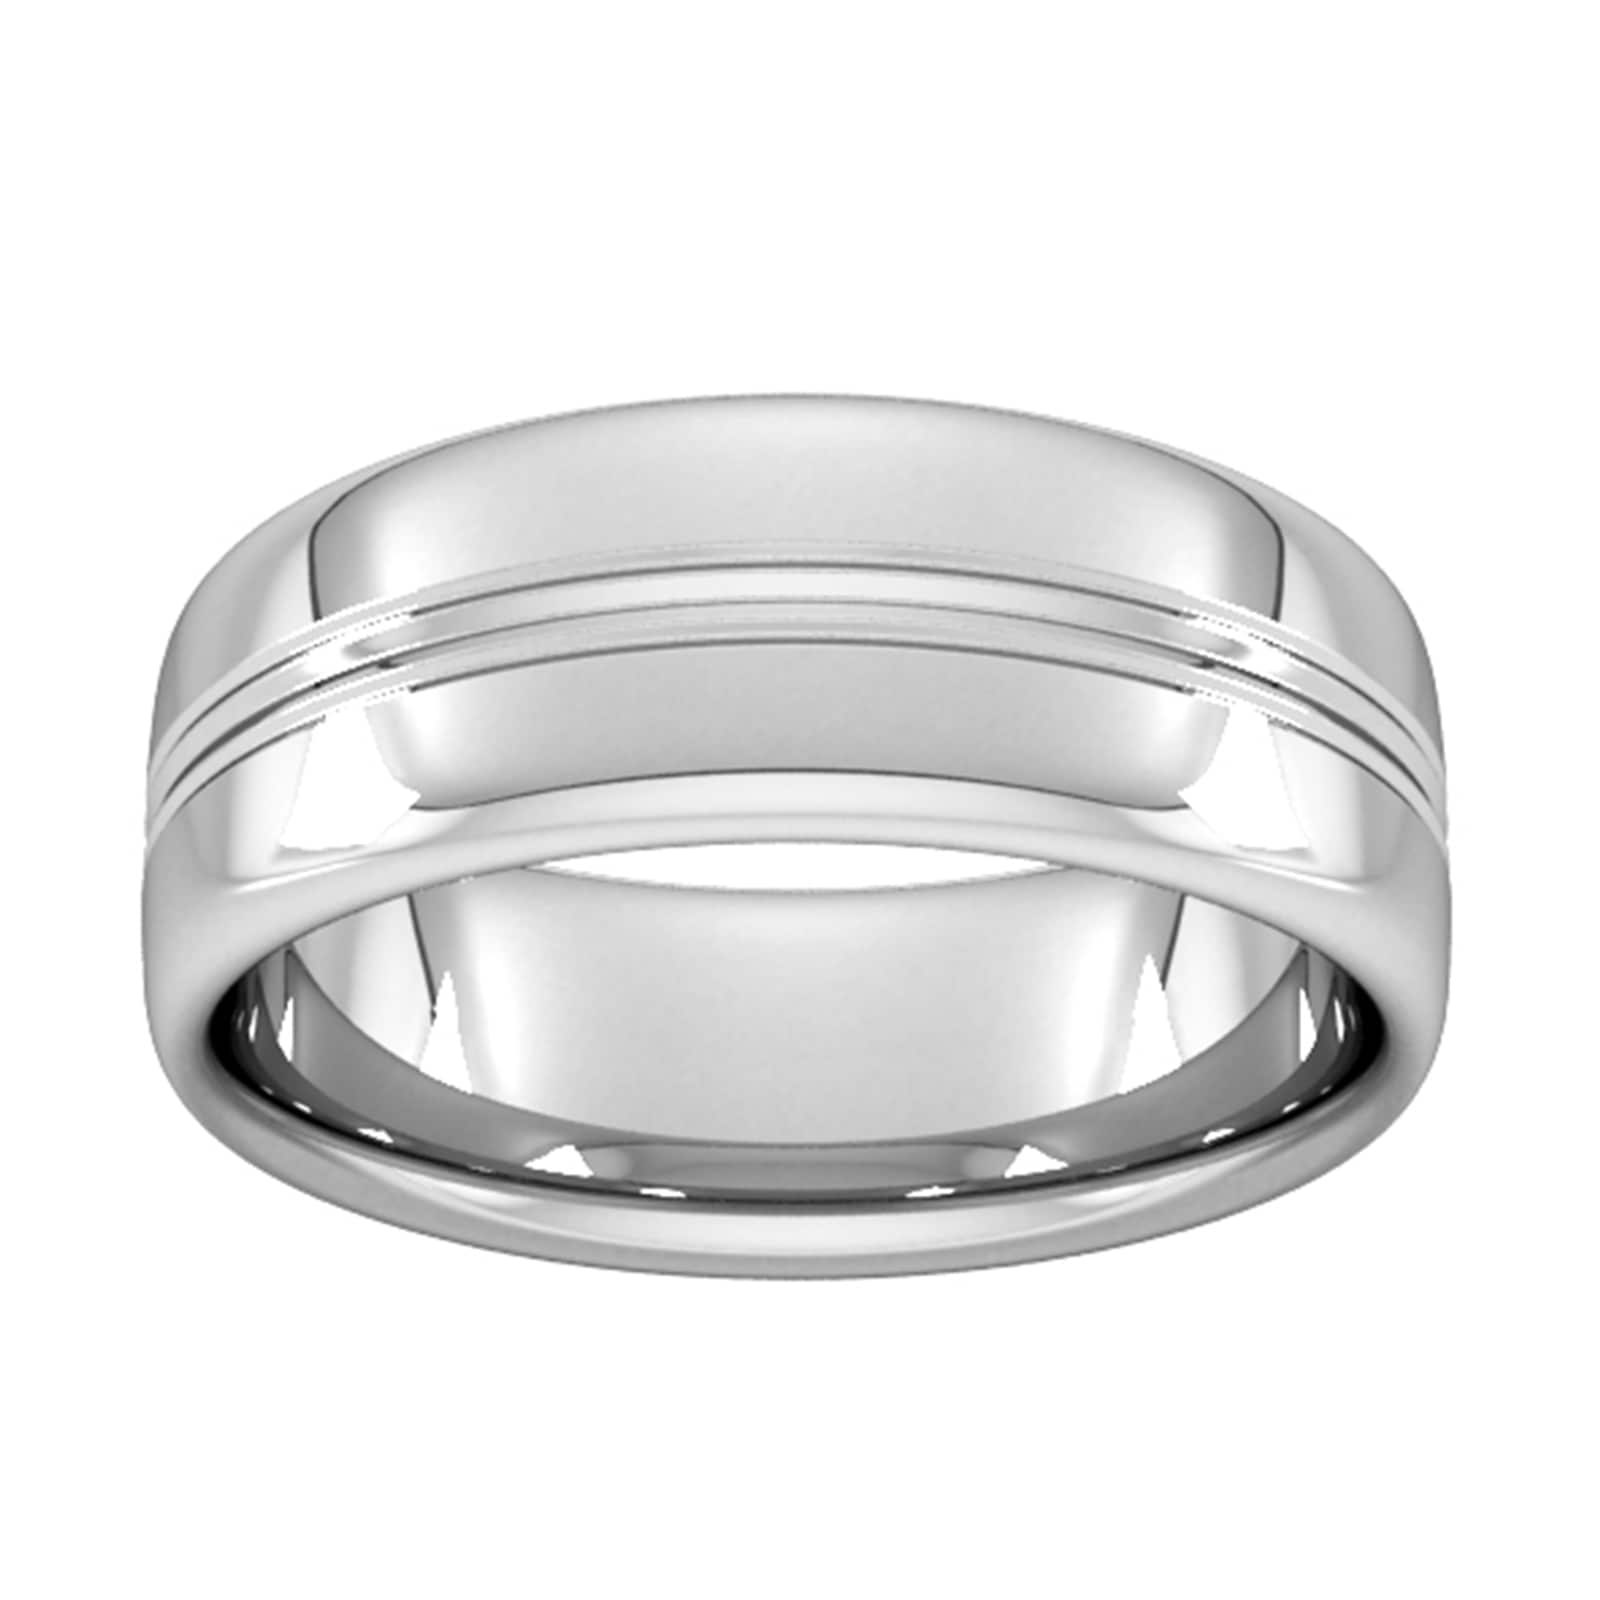 8mm Slight Court Extra Heavy Grooved Polished Finish Wedding Ring In 18 Carat White Gold - Ring Size N